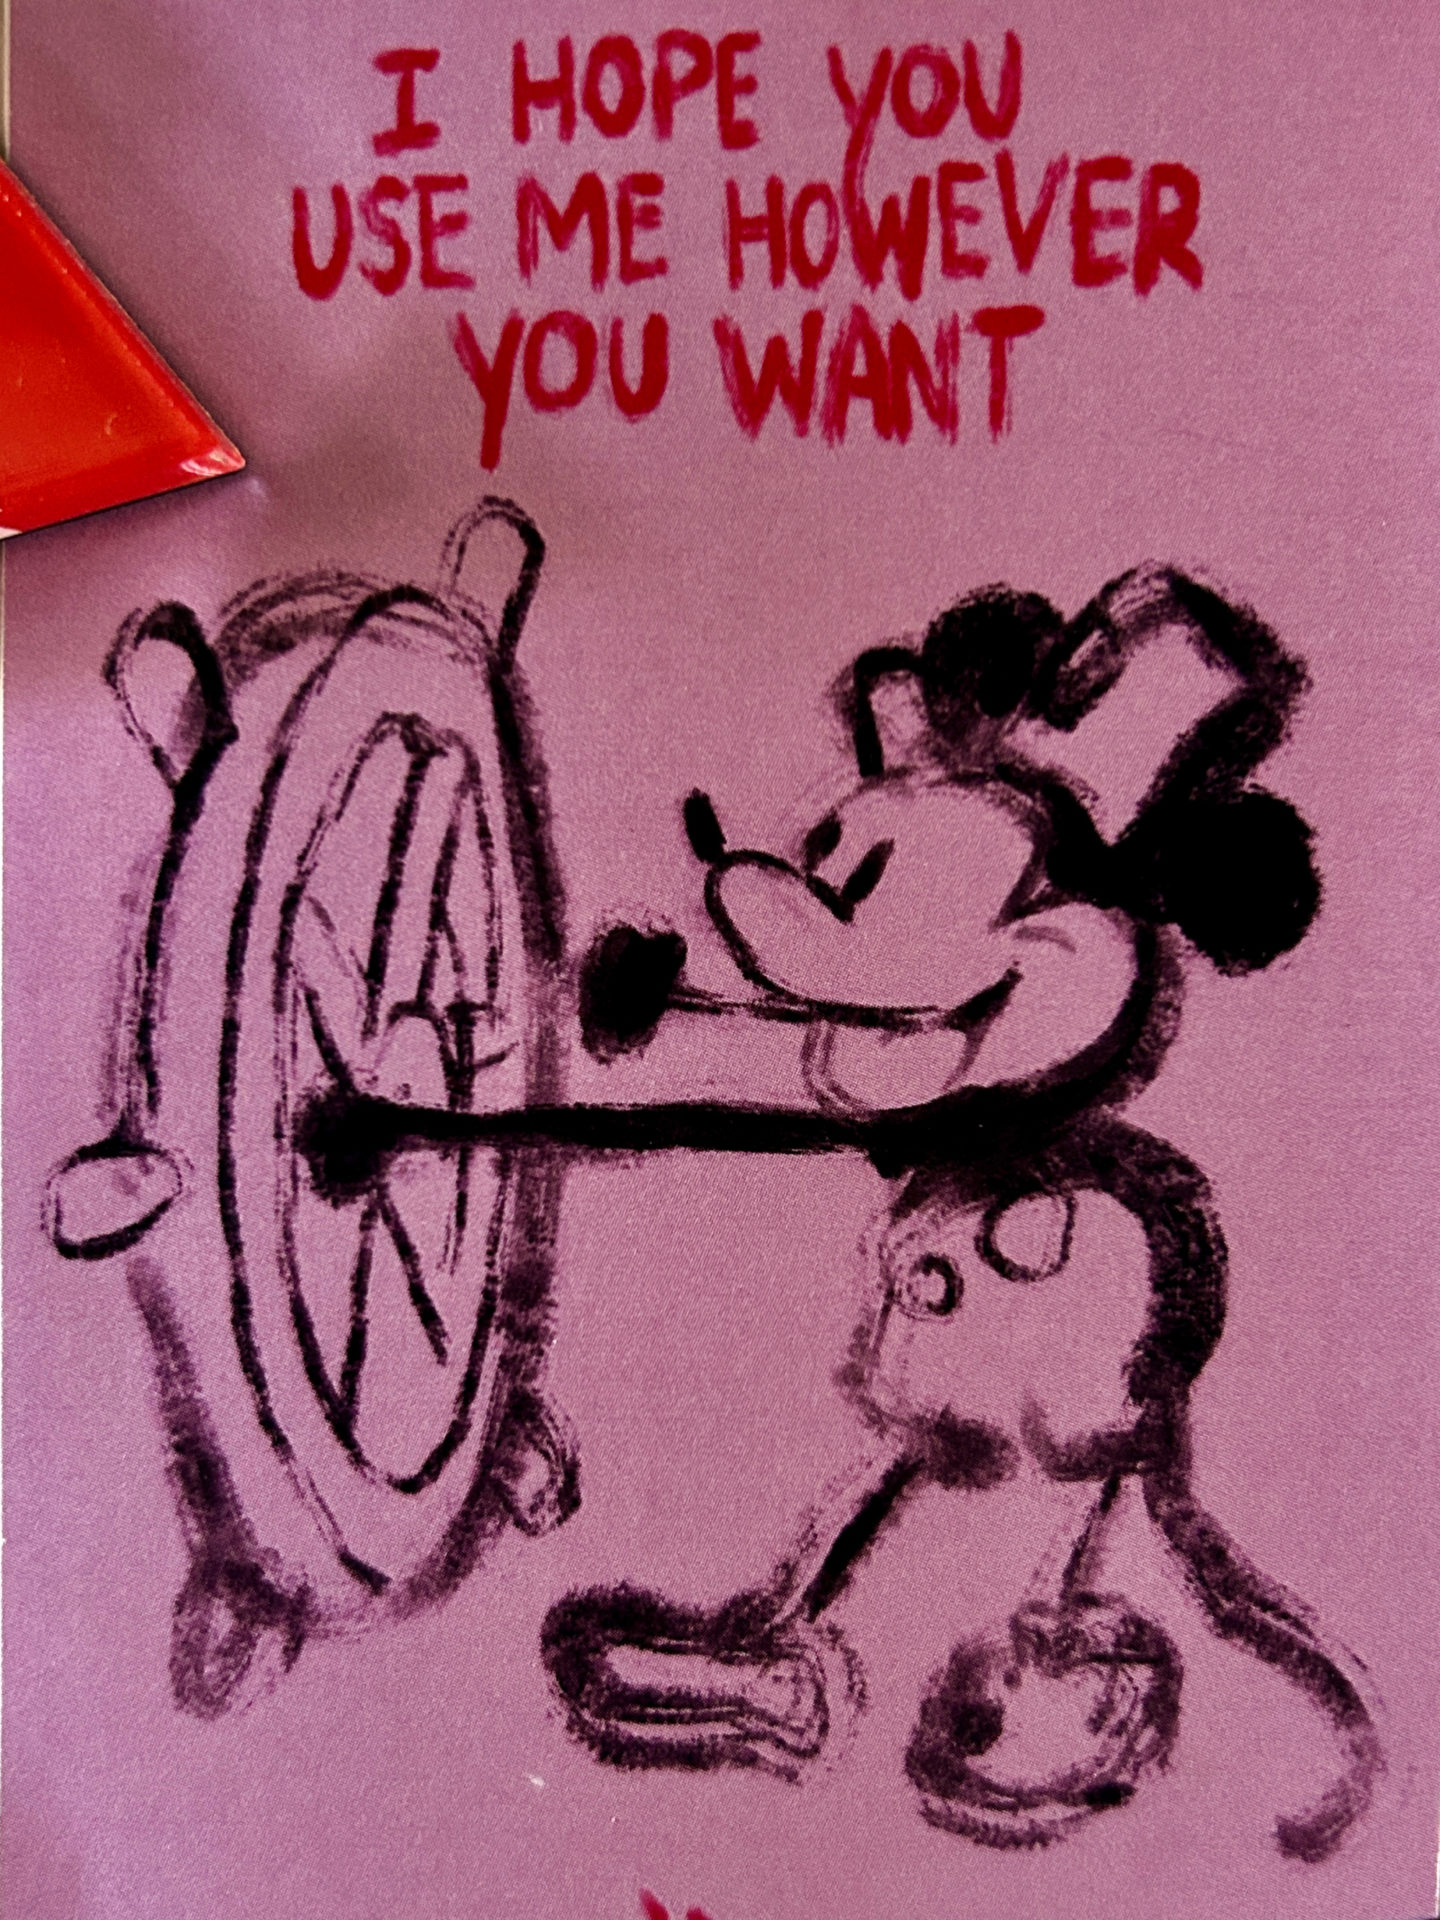 Purple image of Mickey Mouse as Steamboat Willie, steering with a ship steering wheel; the words "I hope you use me however you want" are in red at the top of the image.